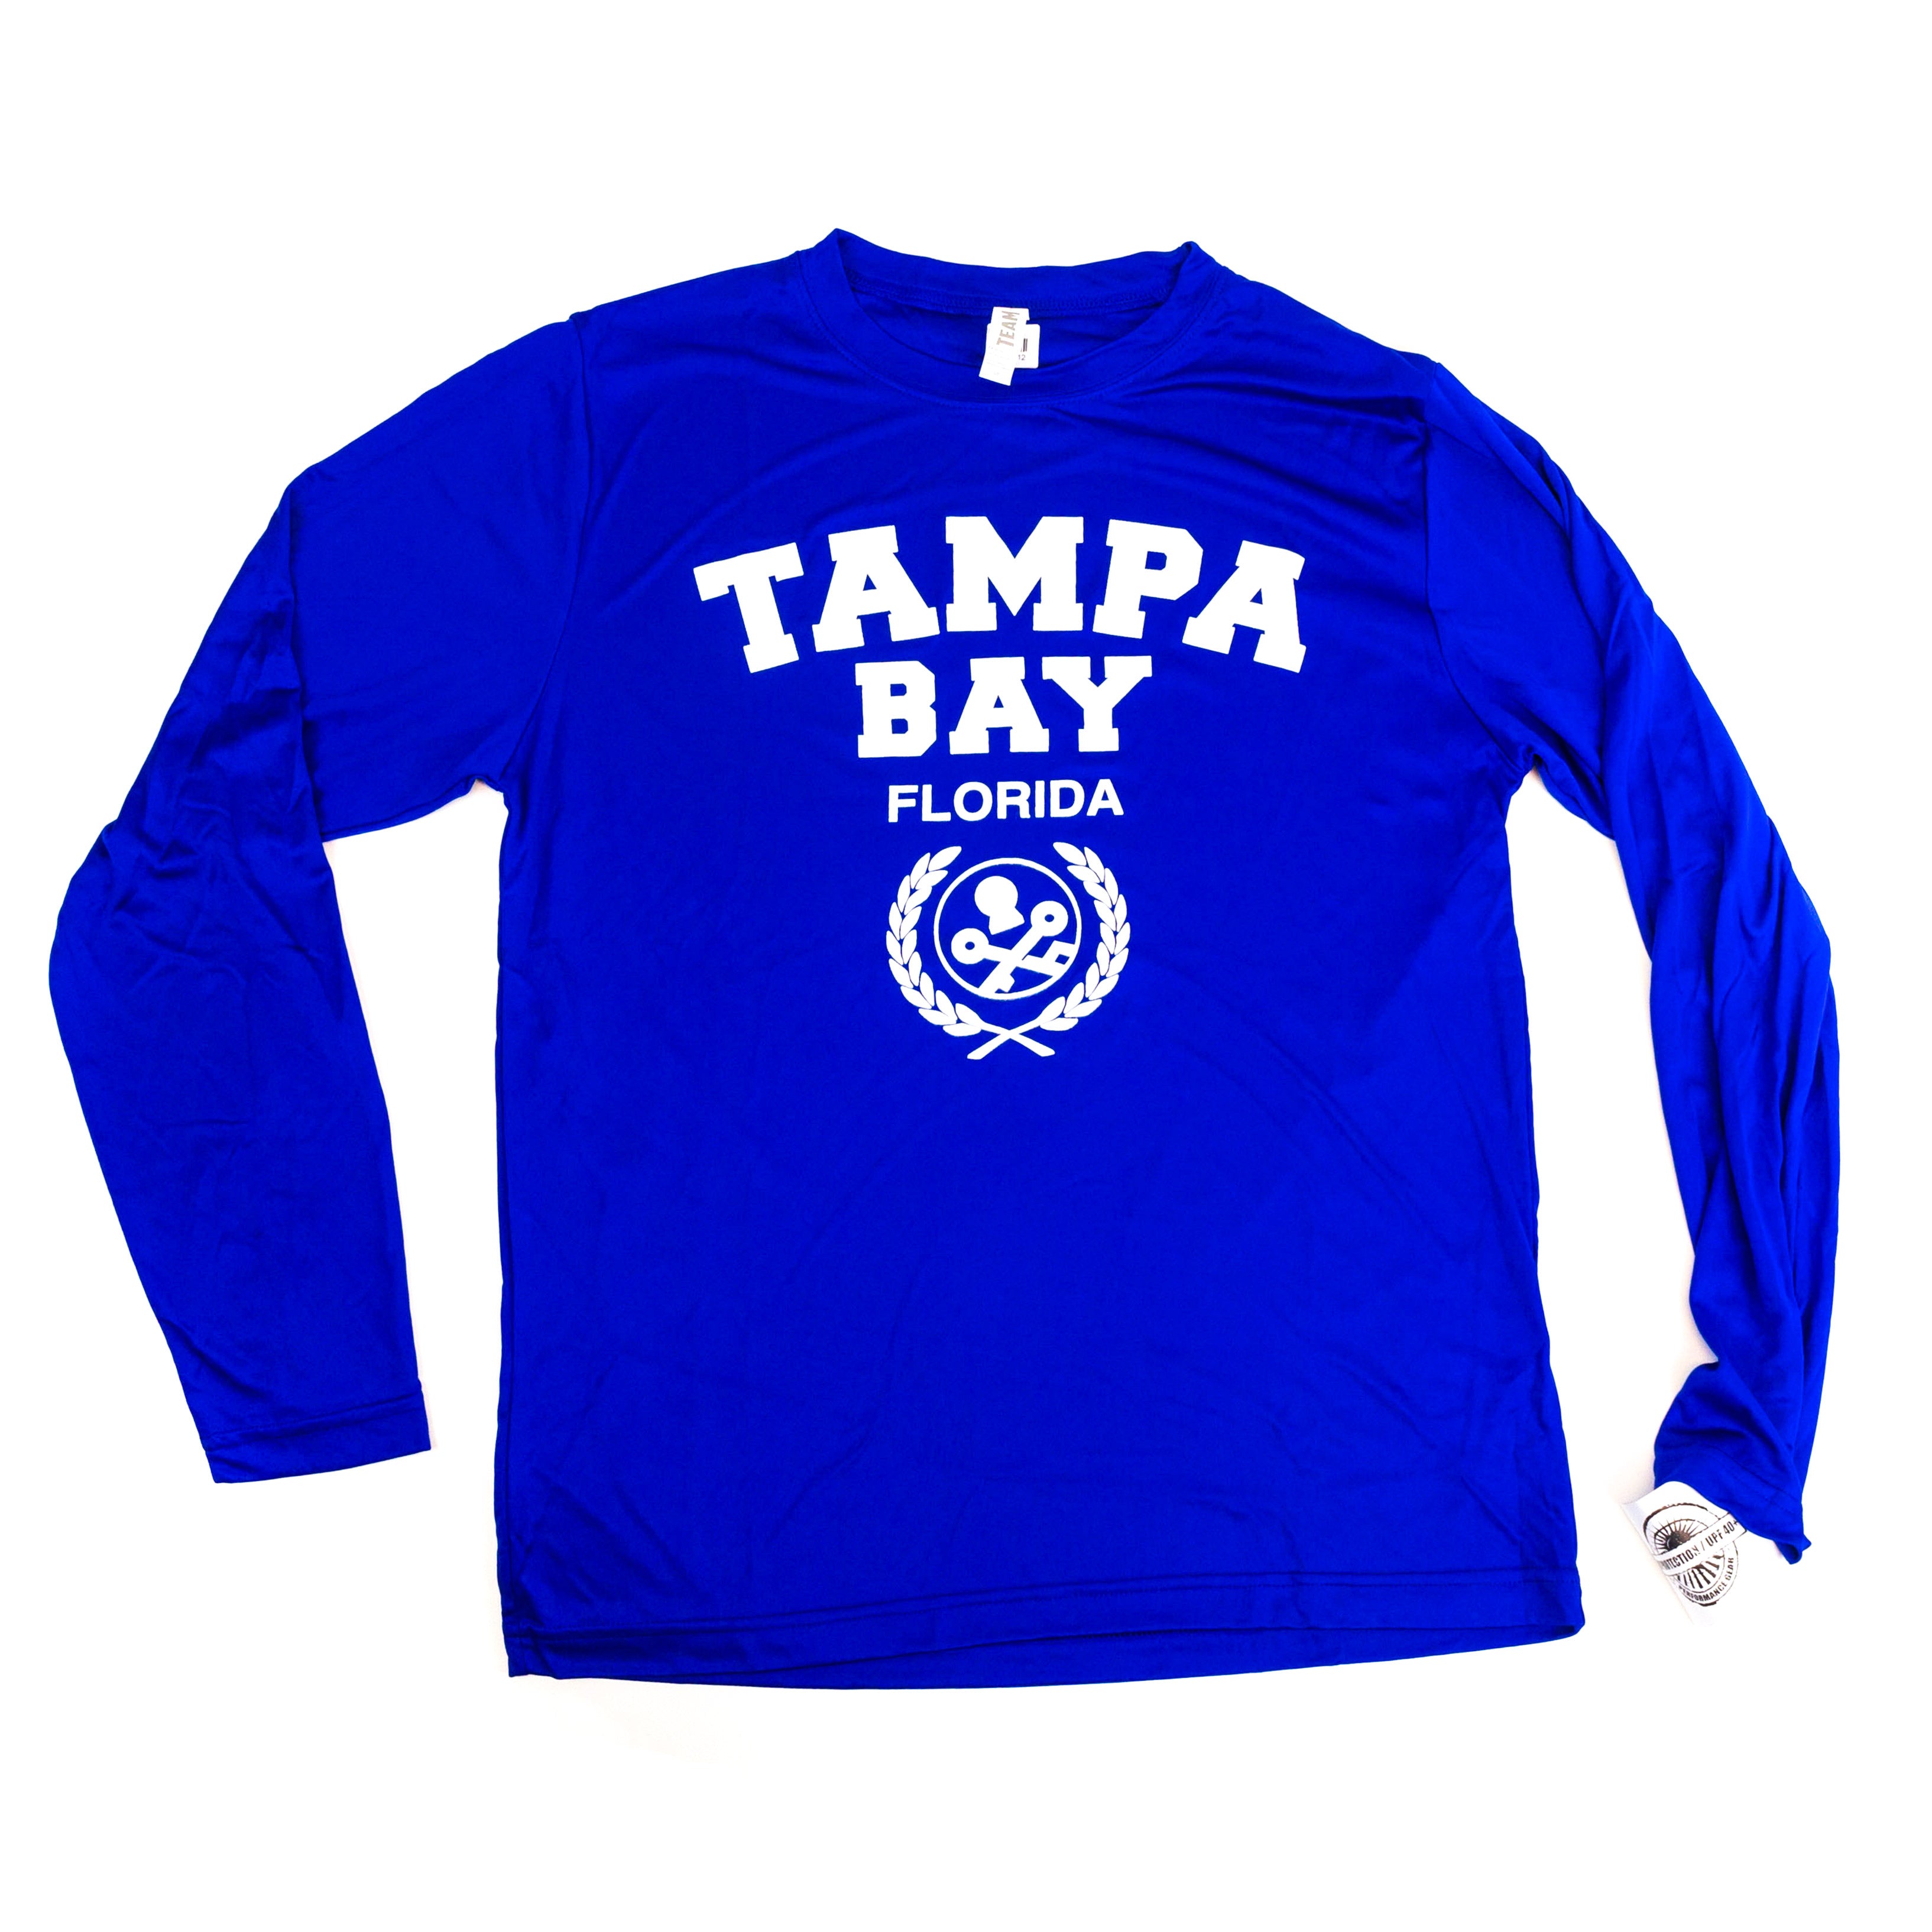 Tampa Bay Long Sleeve Dry Fit - Sport Royal